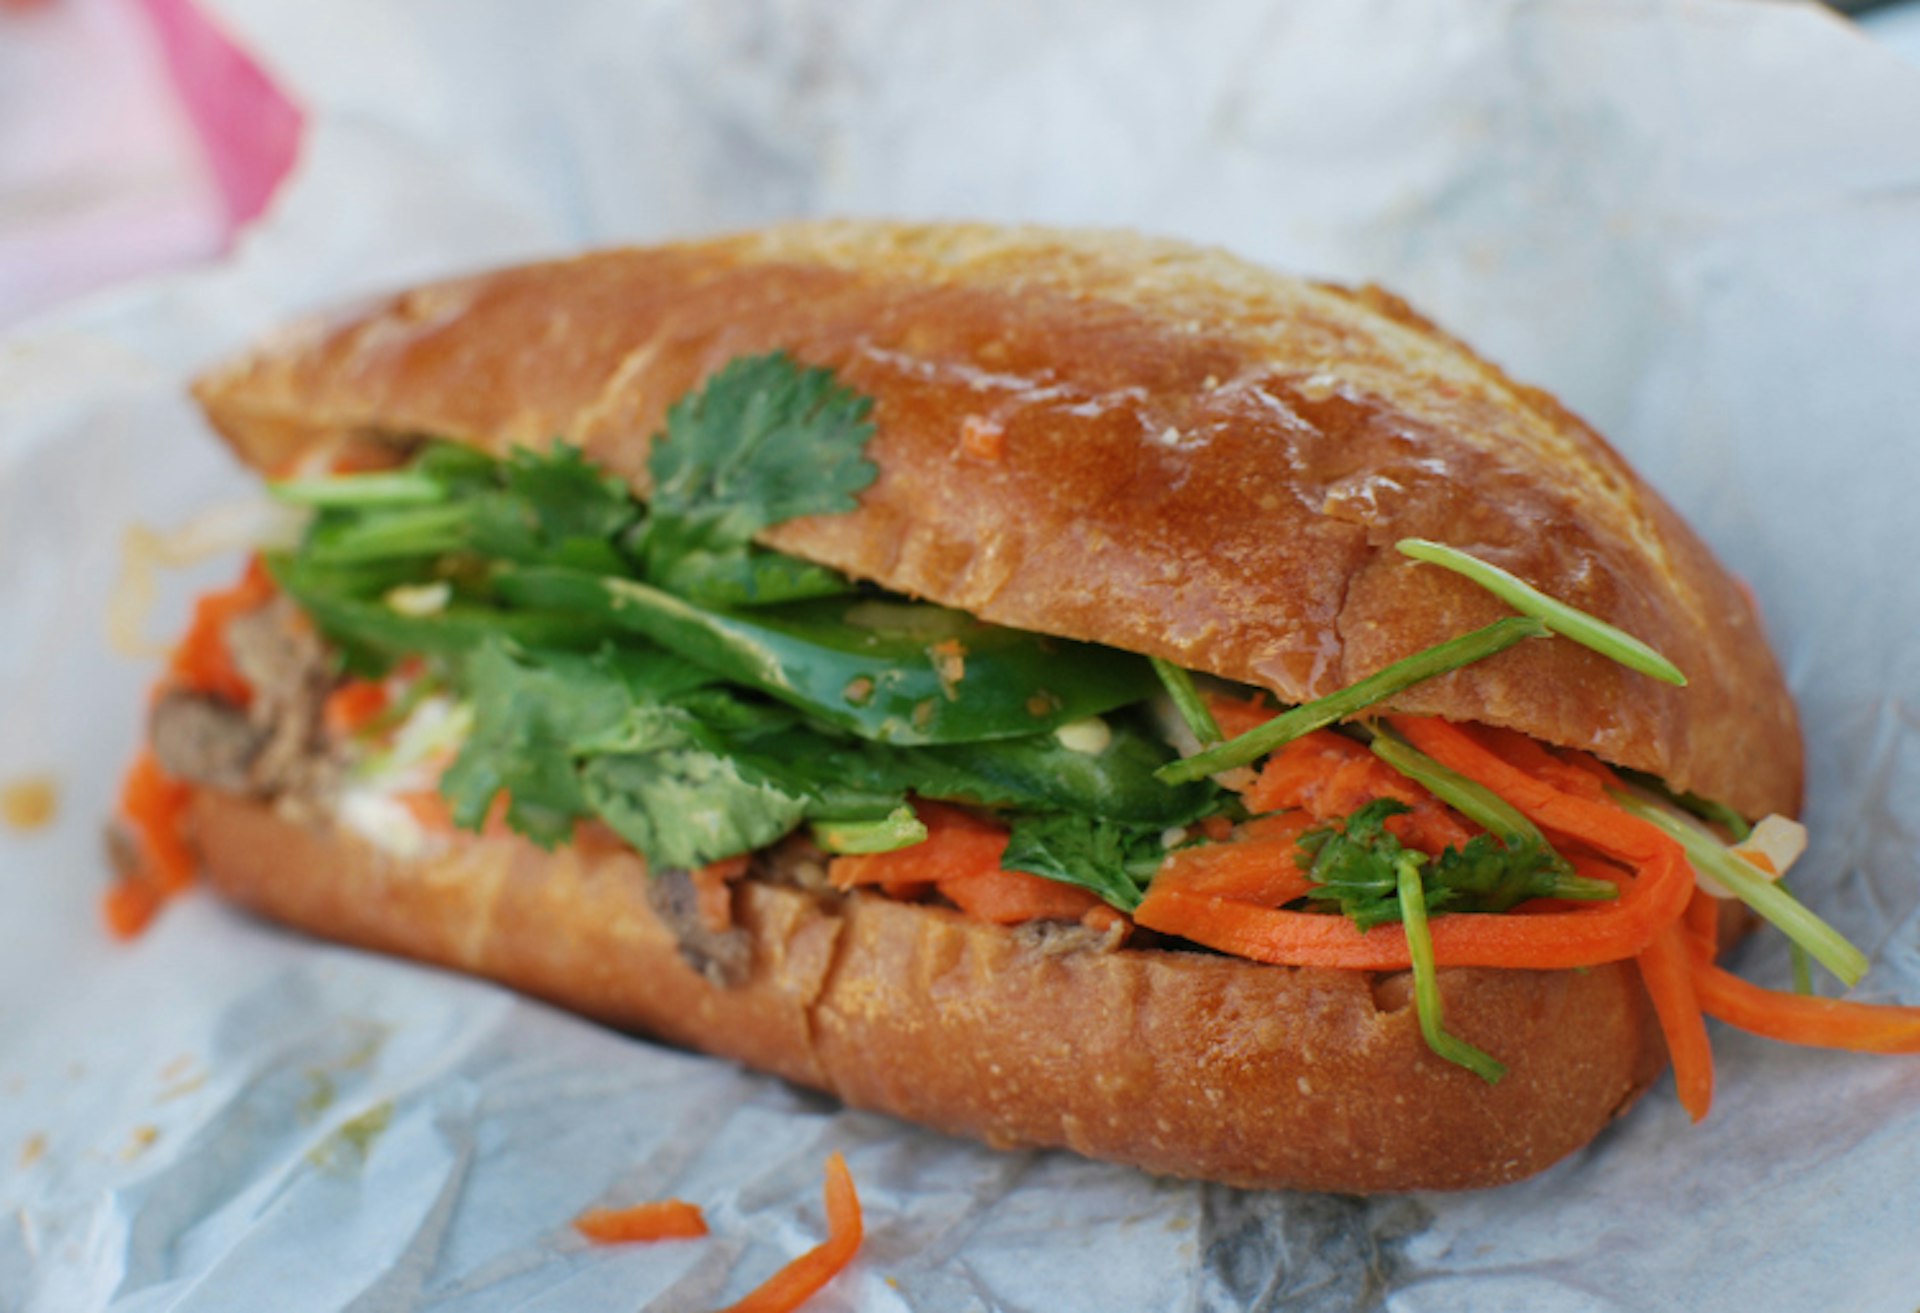 Vietnamese sandwiches never tasted so good. Image by Karen Neoh / CC BY 2.0